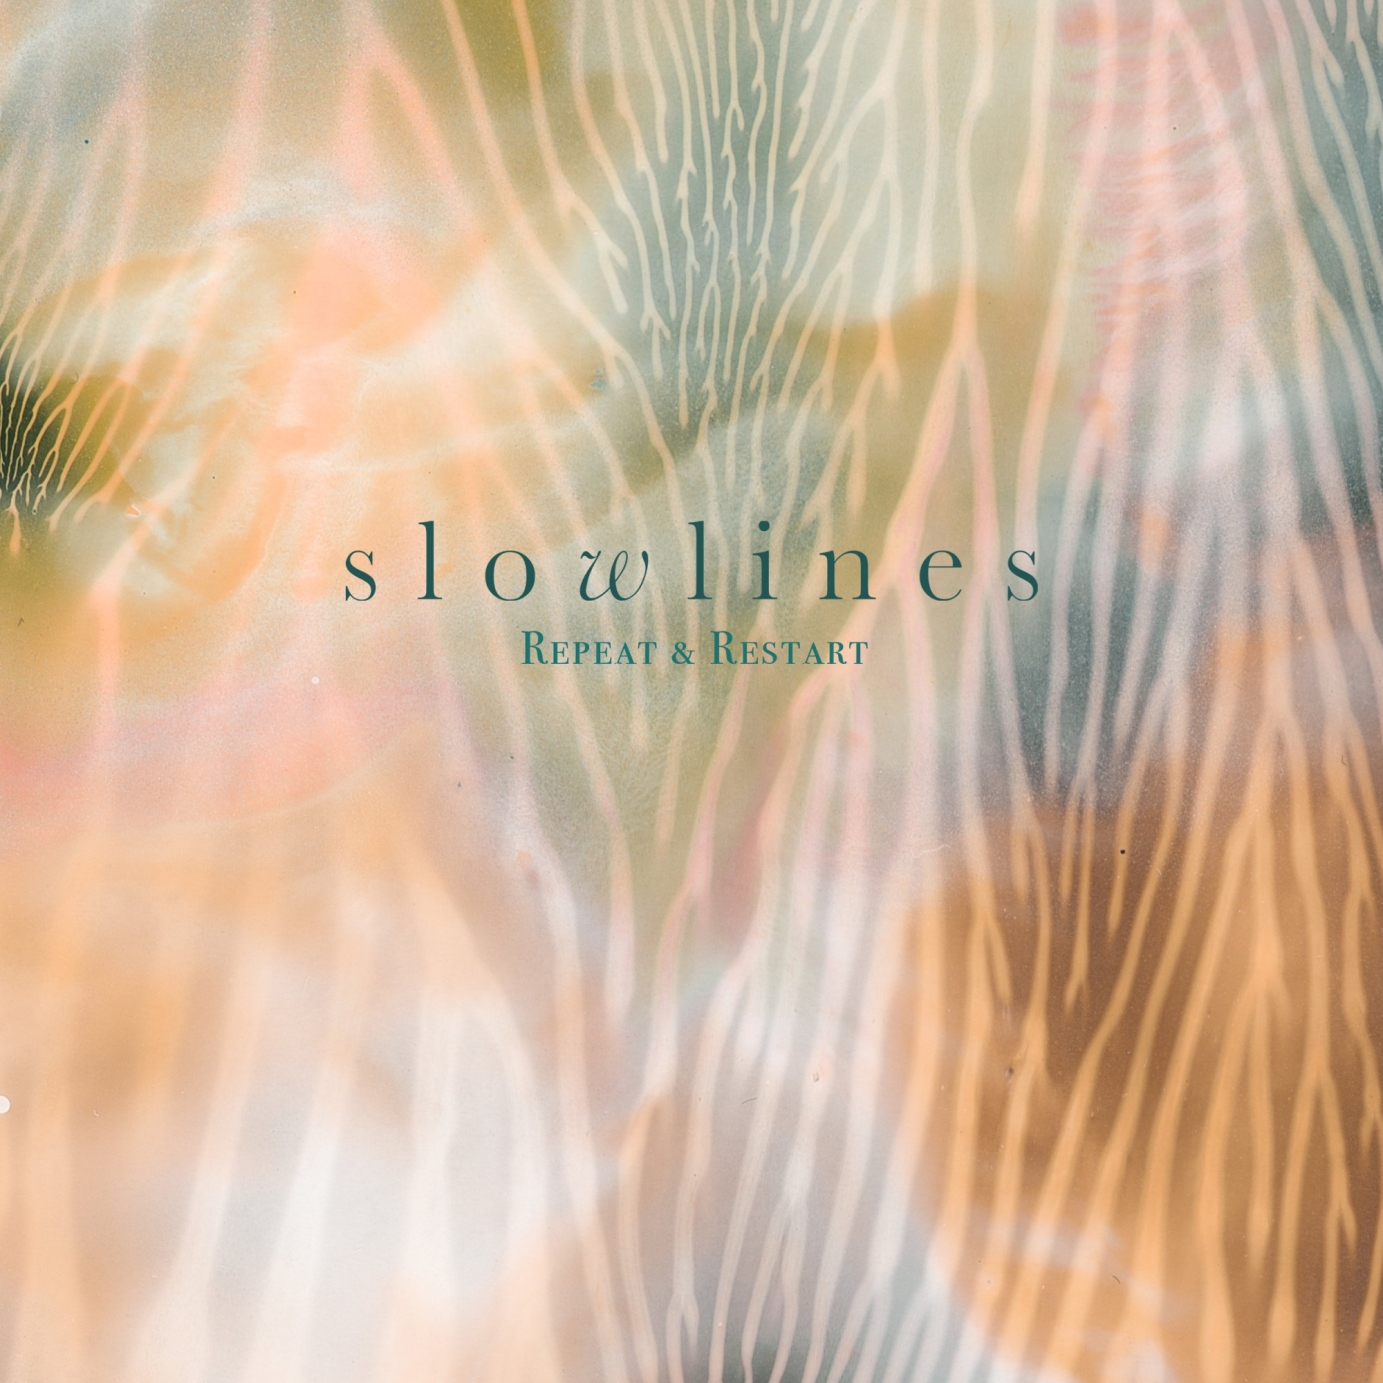 Artwork for Slowlines by FraserTaylor